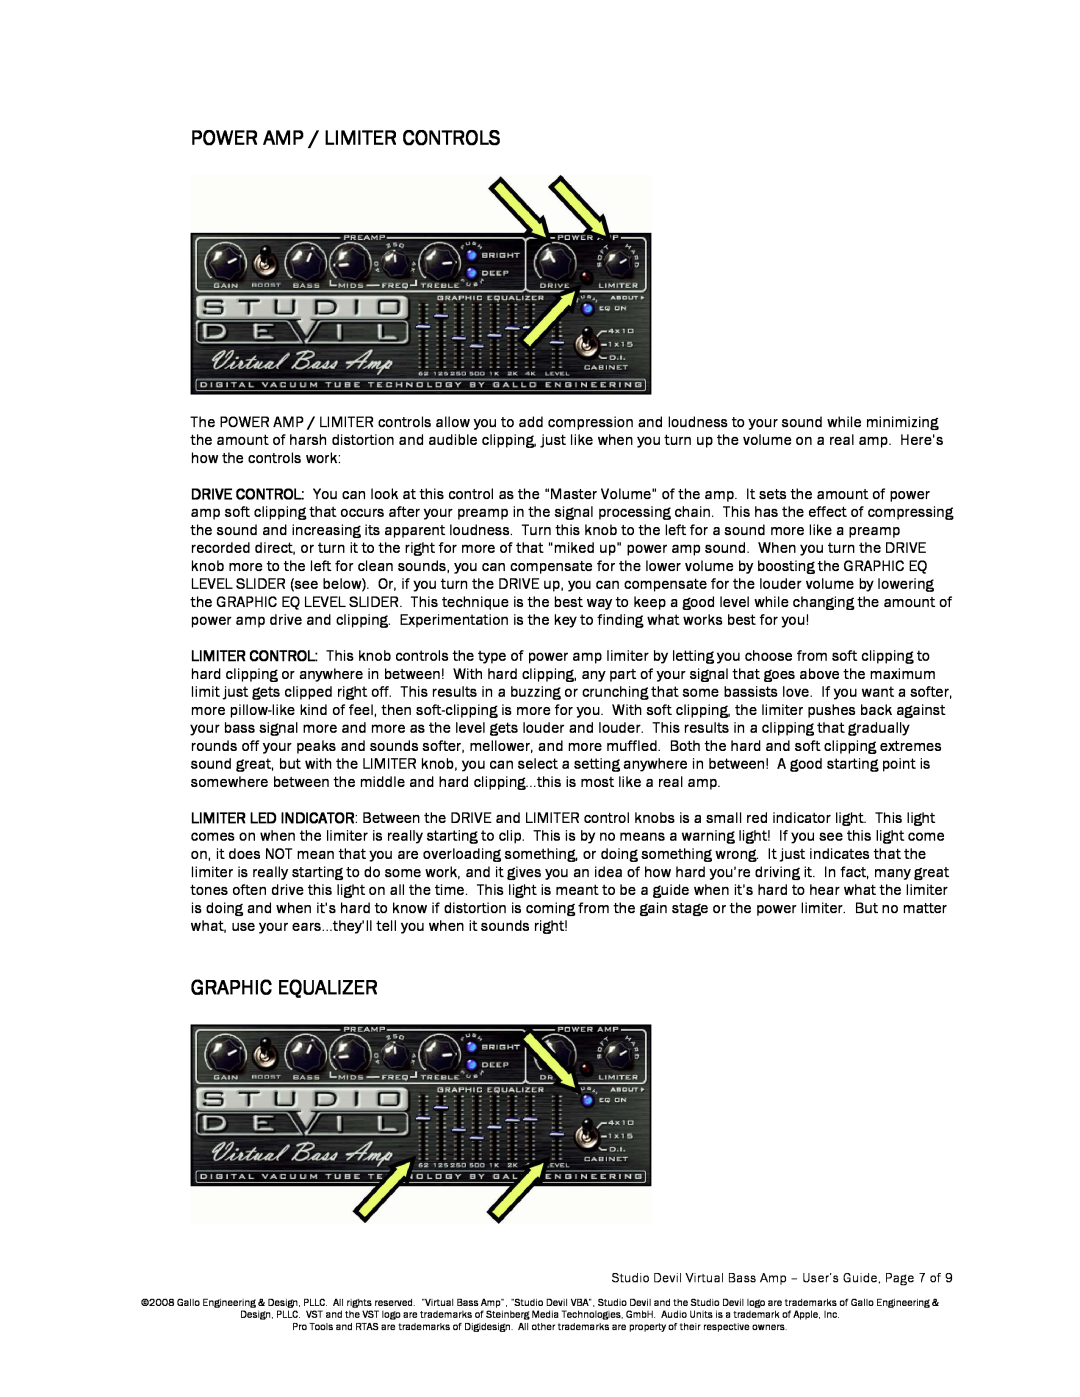 Apple manual Power Amp / Limiter Controls, Graphic Equalizer, Studio Devil Virtual Bass Amp - User’s Guide 